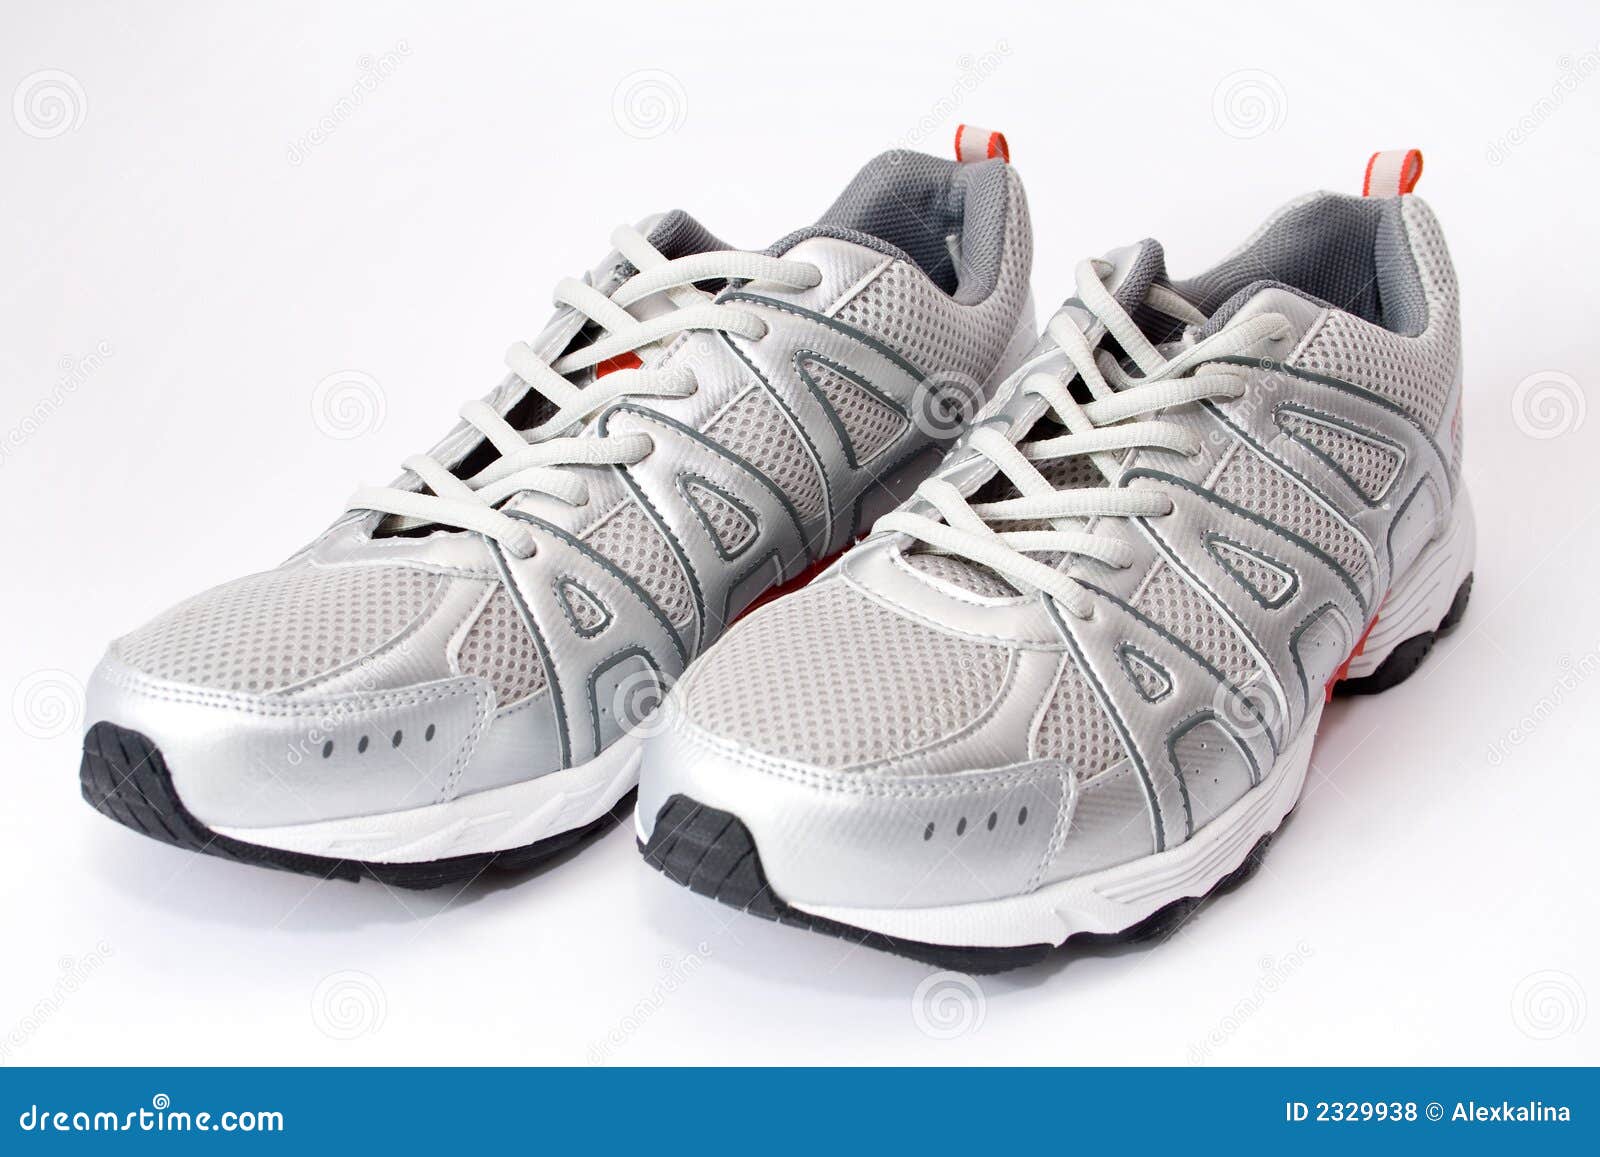 Jogging shoes stock photo. Image of athlete, personal - 2329938